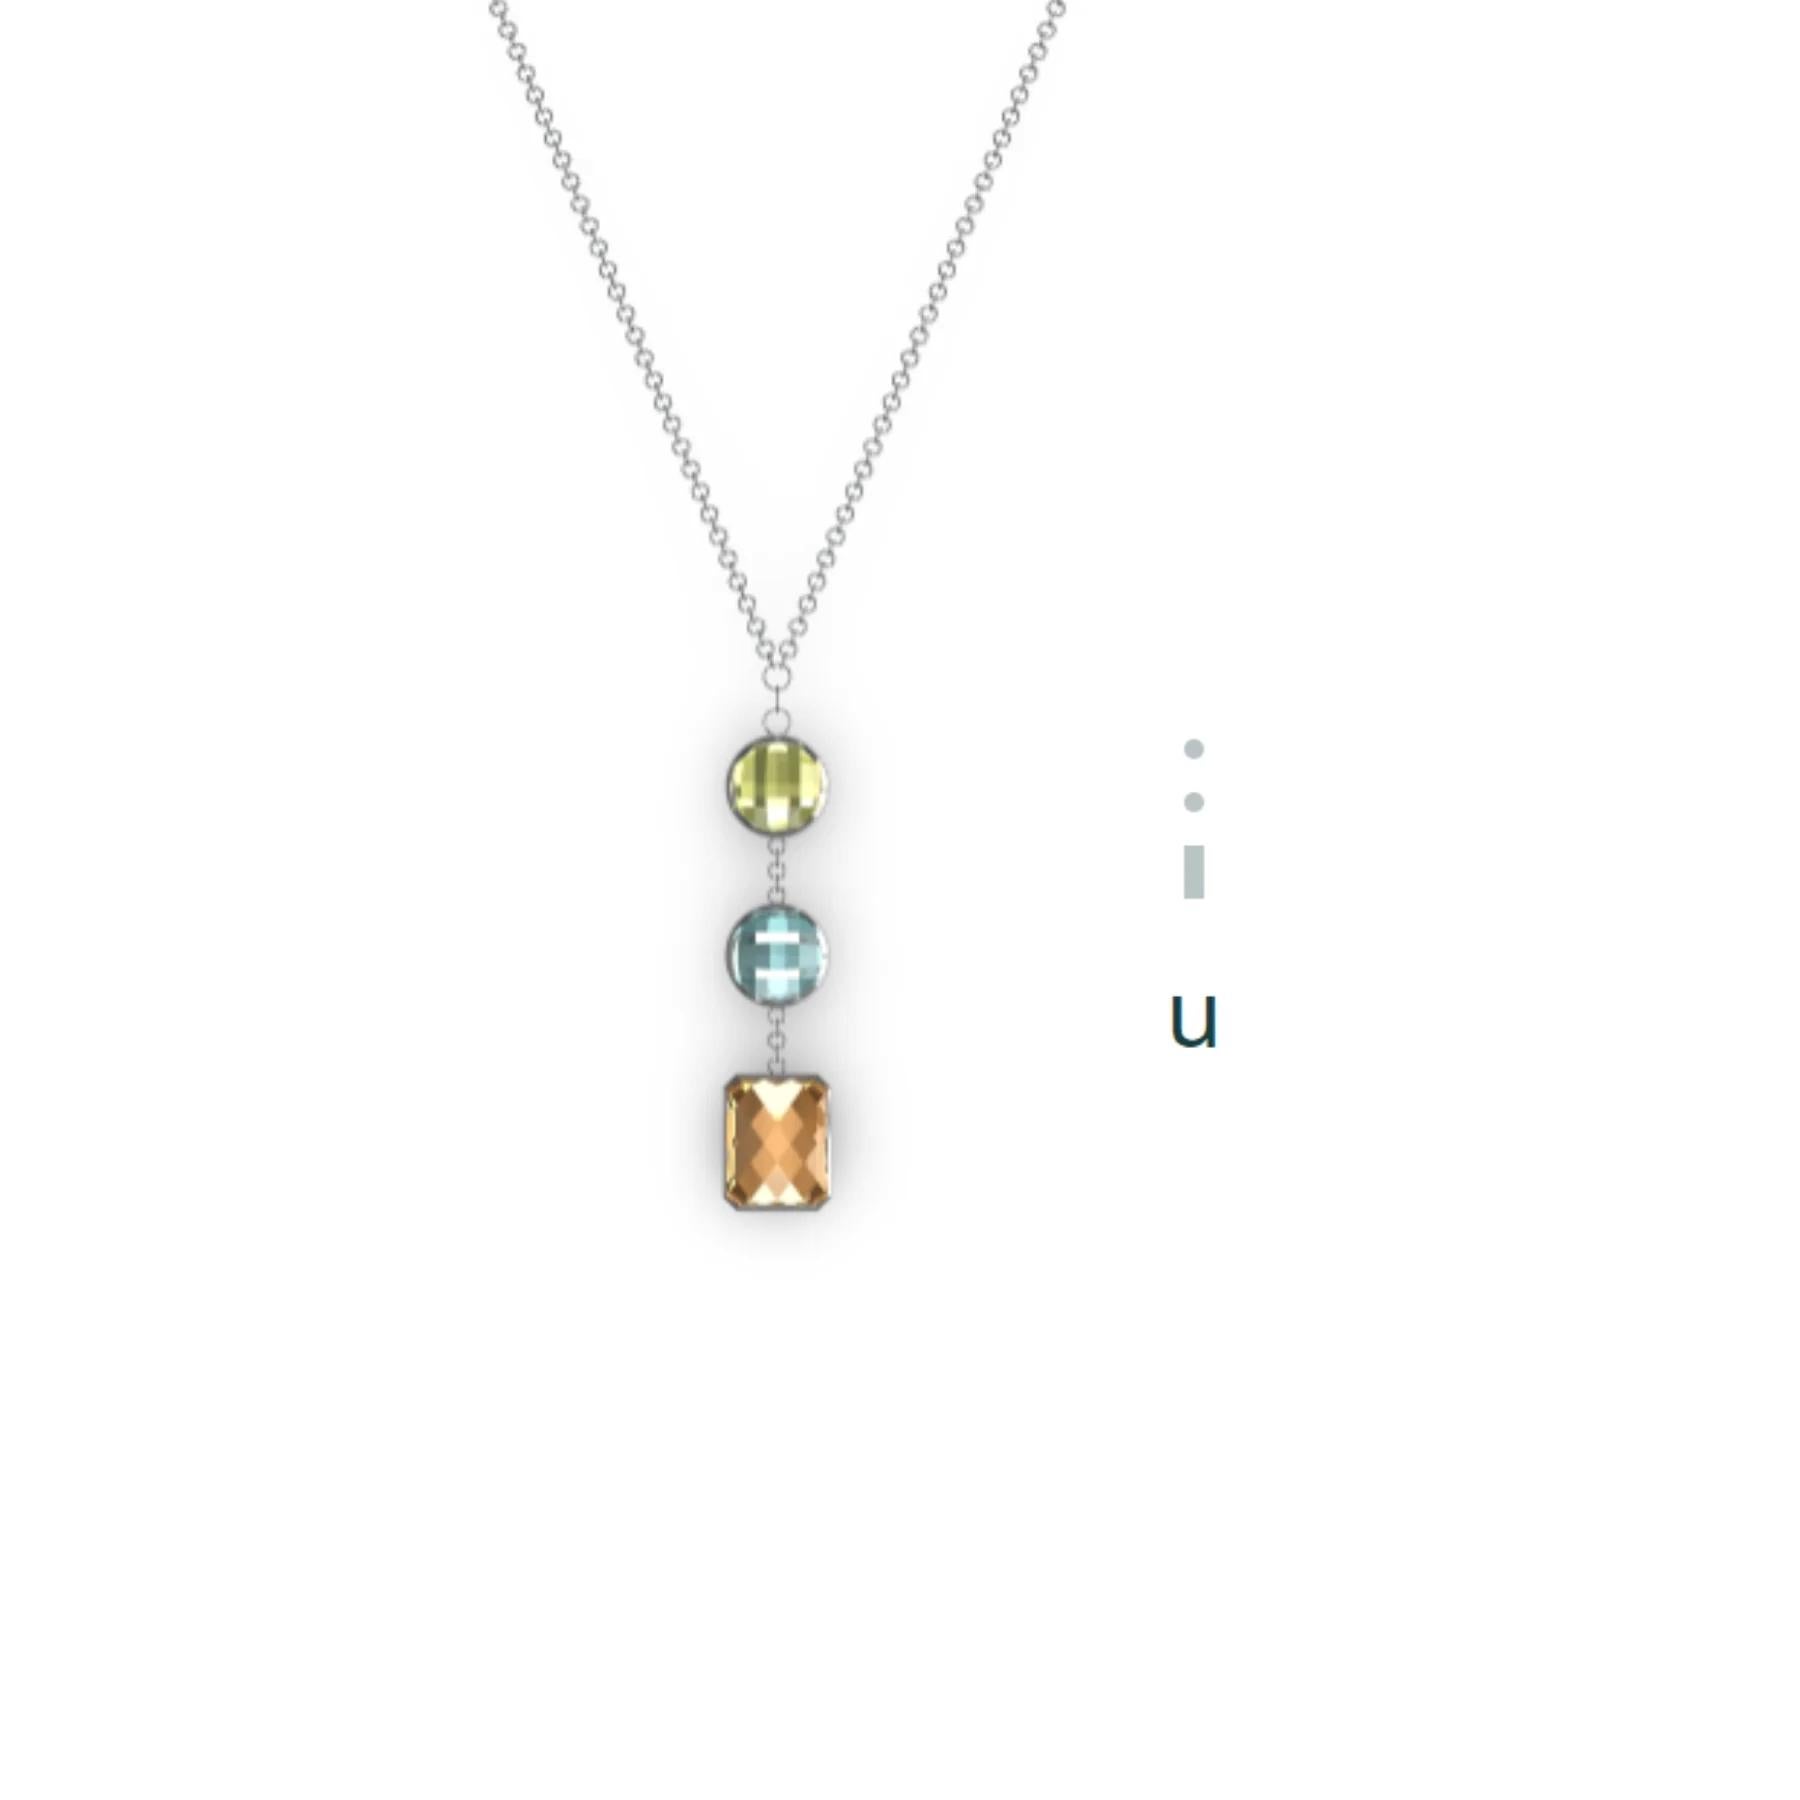 U is for Unforgettable, Unshakeable, Unity… Encode the letters of your name, your children's initials, your lucky numbers, or a secret message of inspiration.

Details of this piece:
Handcrafted
Recycled 925 sterling silver

About Us
In the